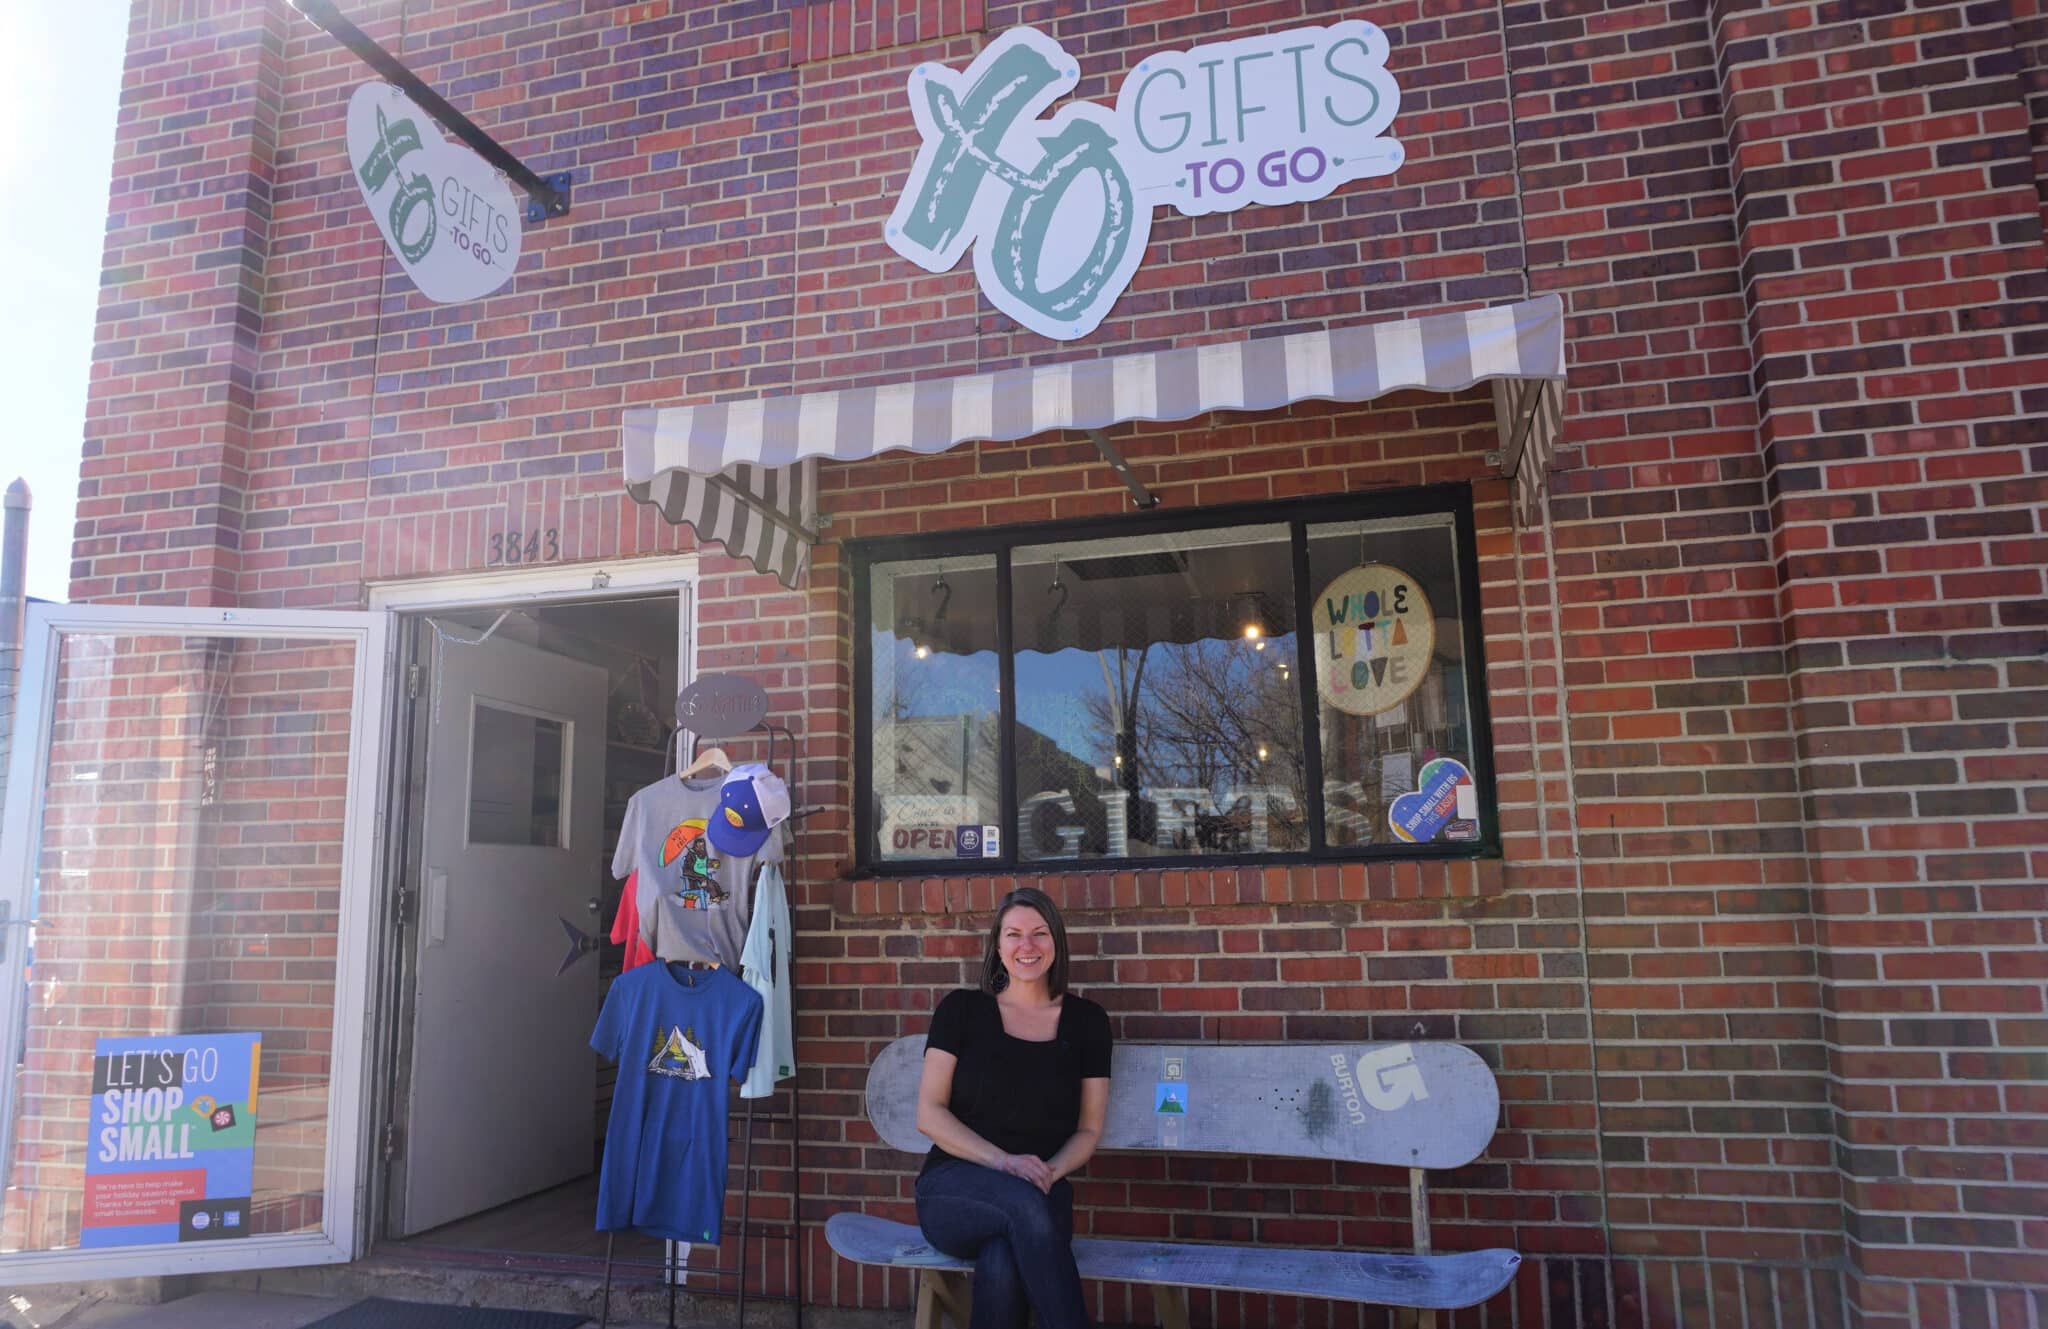 Gift shop owners open second store on Tennyson Street